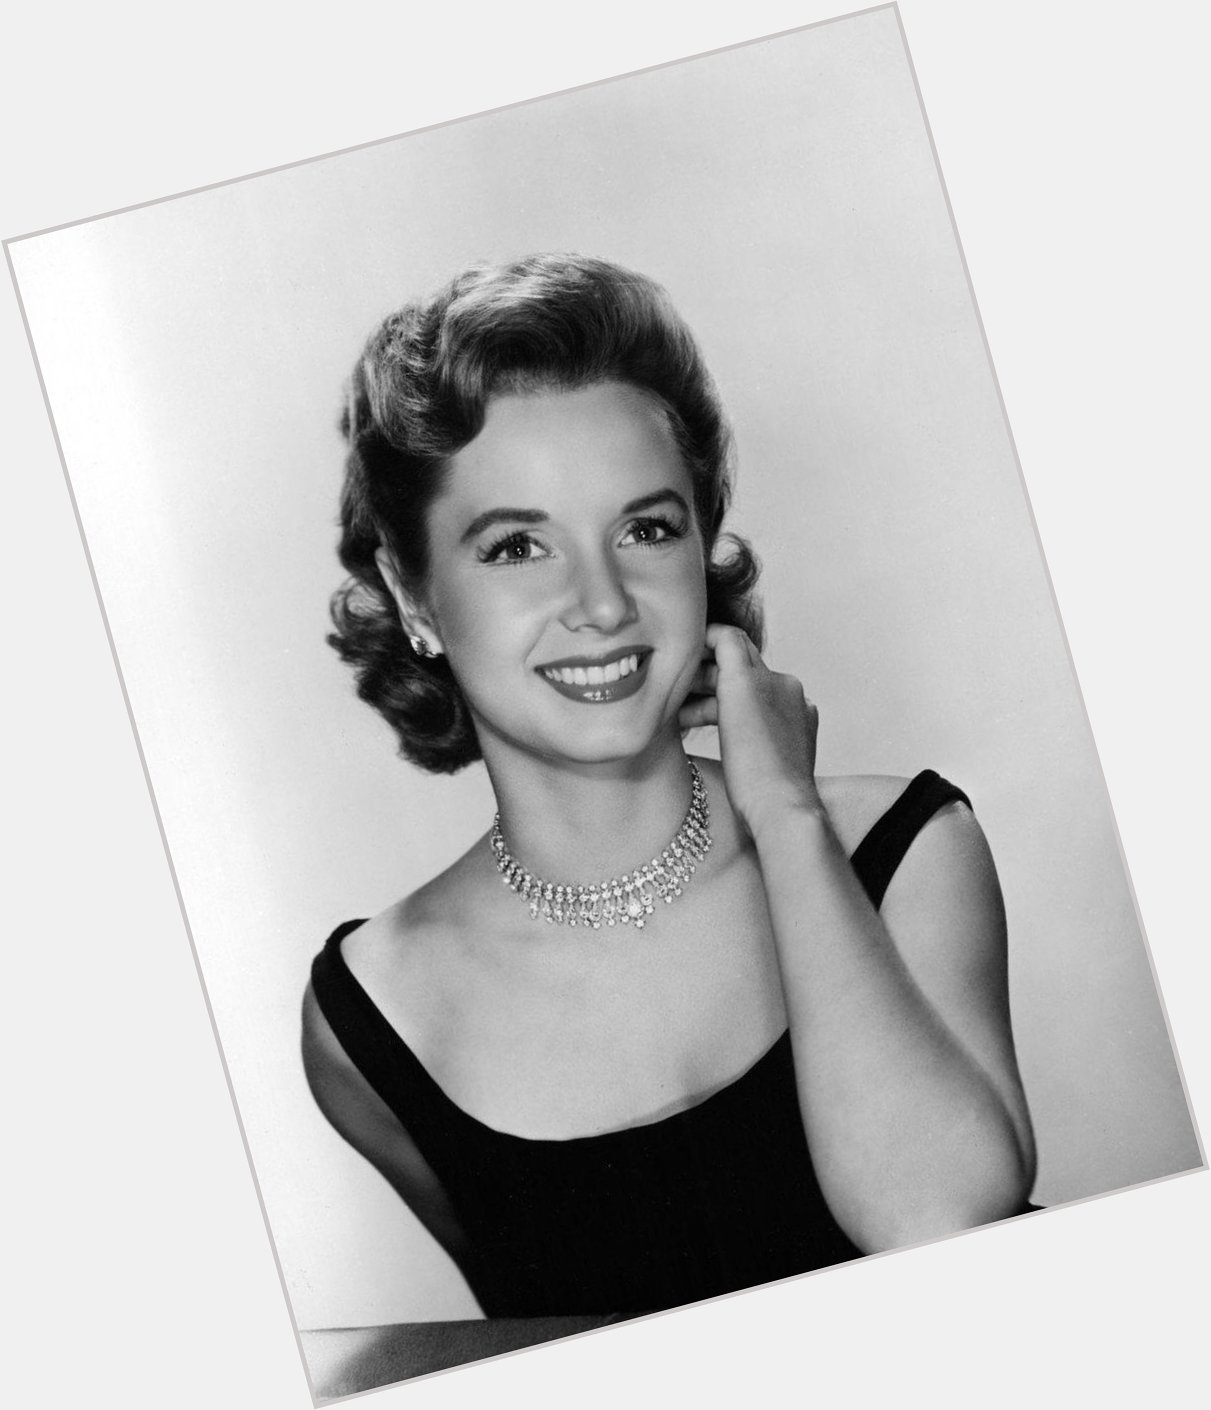 Happy birthday to the beautiful and talented debbie reynolds who would have turned 90 today 